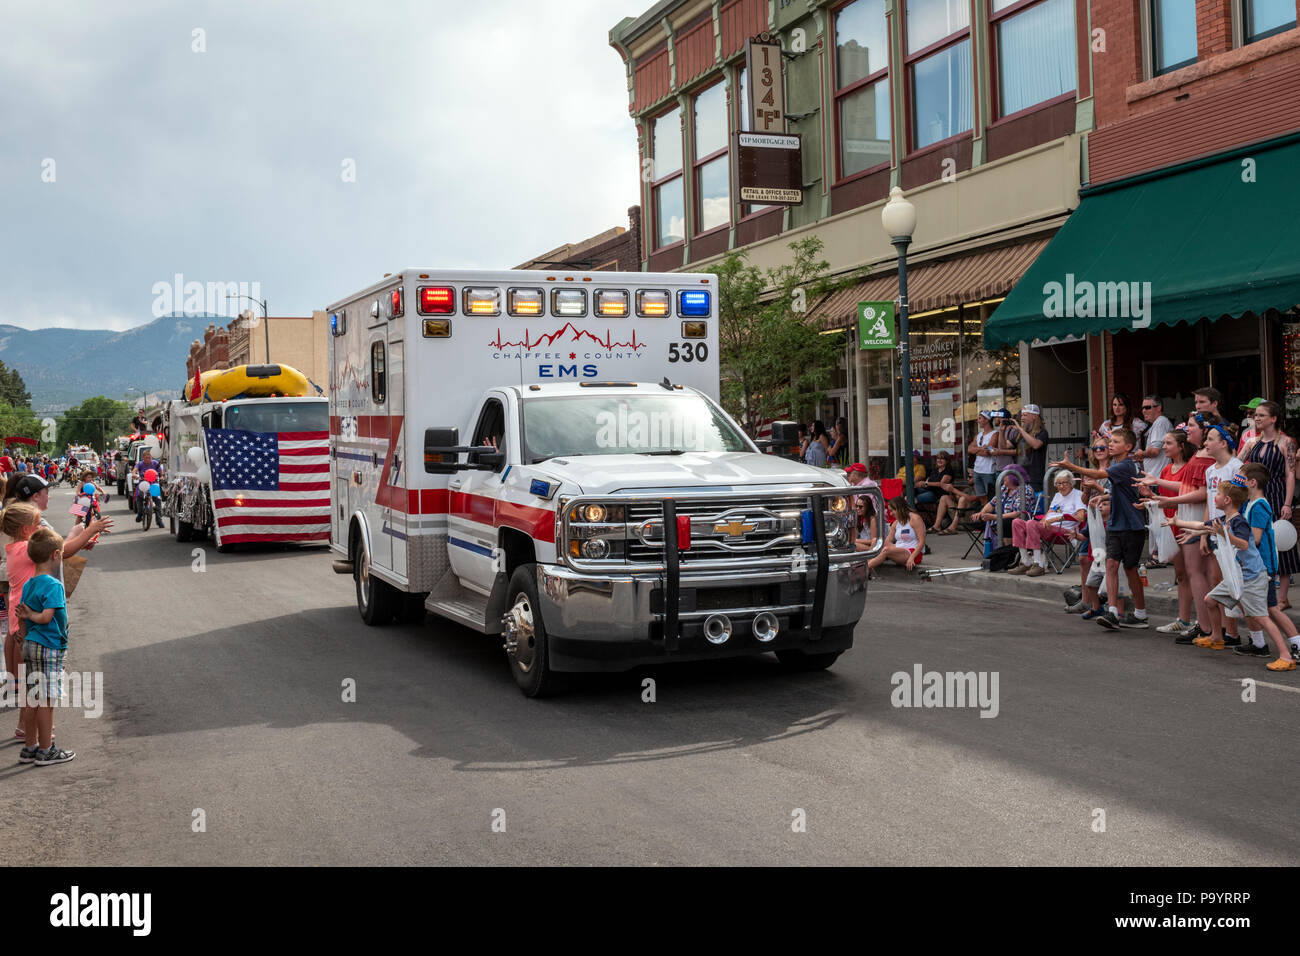 Emergency Medical Services ambulance; annual Fourth of July Parade in the small Colorado mountain town of Salida. Stock Photo